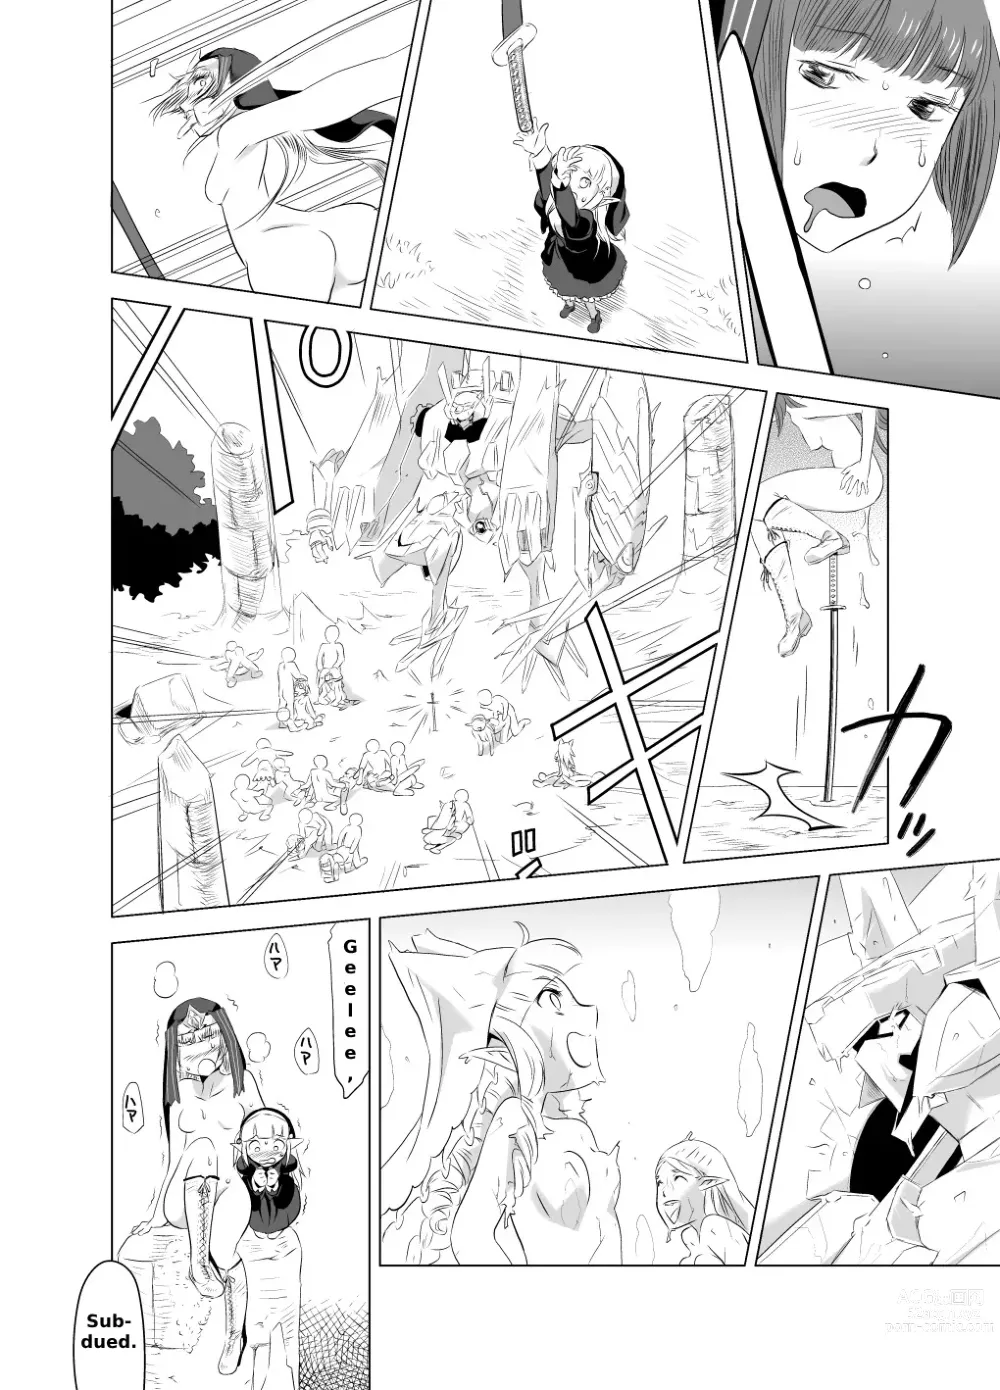 Page 22 of doujinshi 2nd RIDE -Battle Sister crisiS-